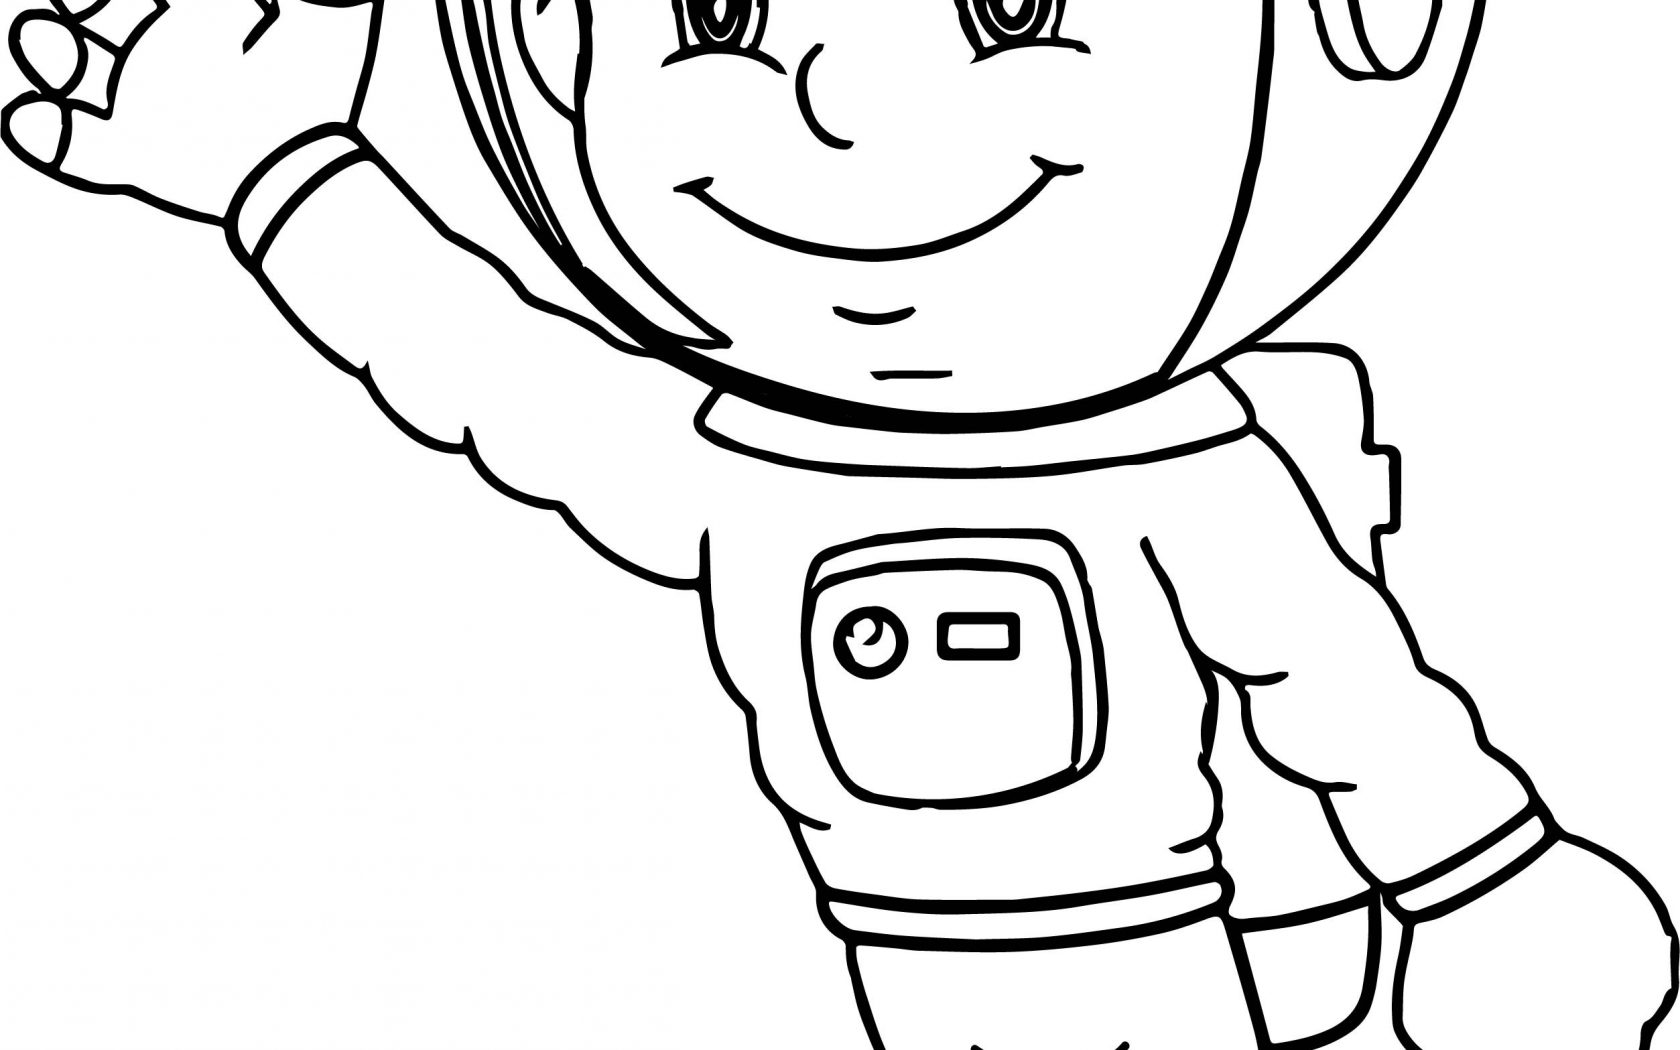 Spaceman Coloring Pages at GetColorings.com | Free printable colorings